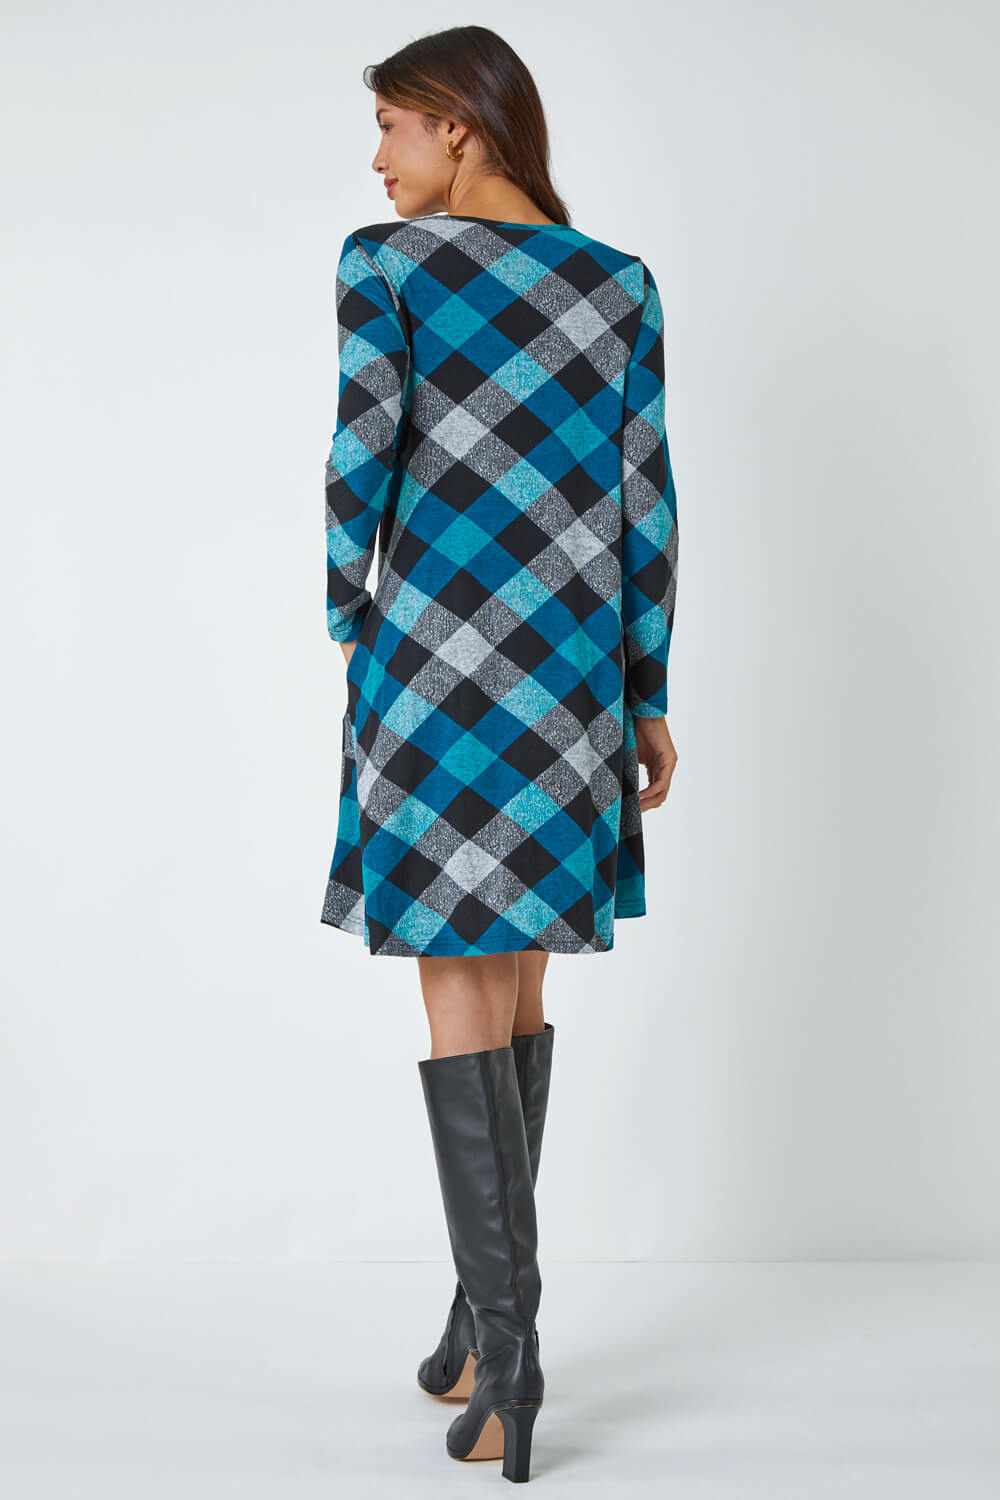 Teal Check Print Swing Stretch Dress, Image 3 of 5